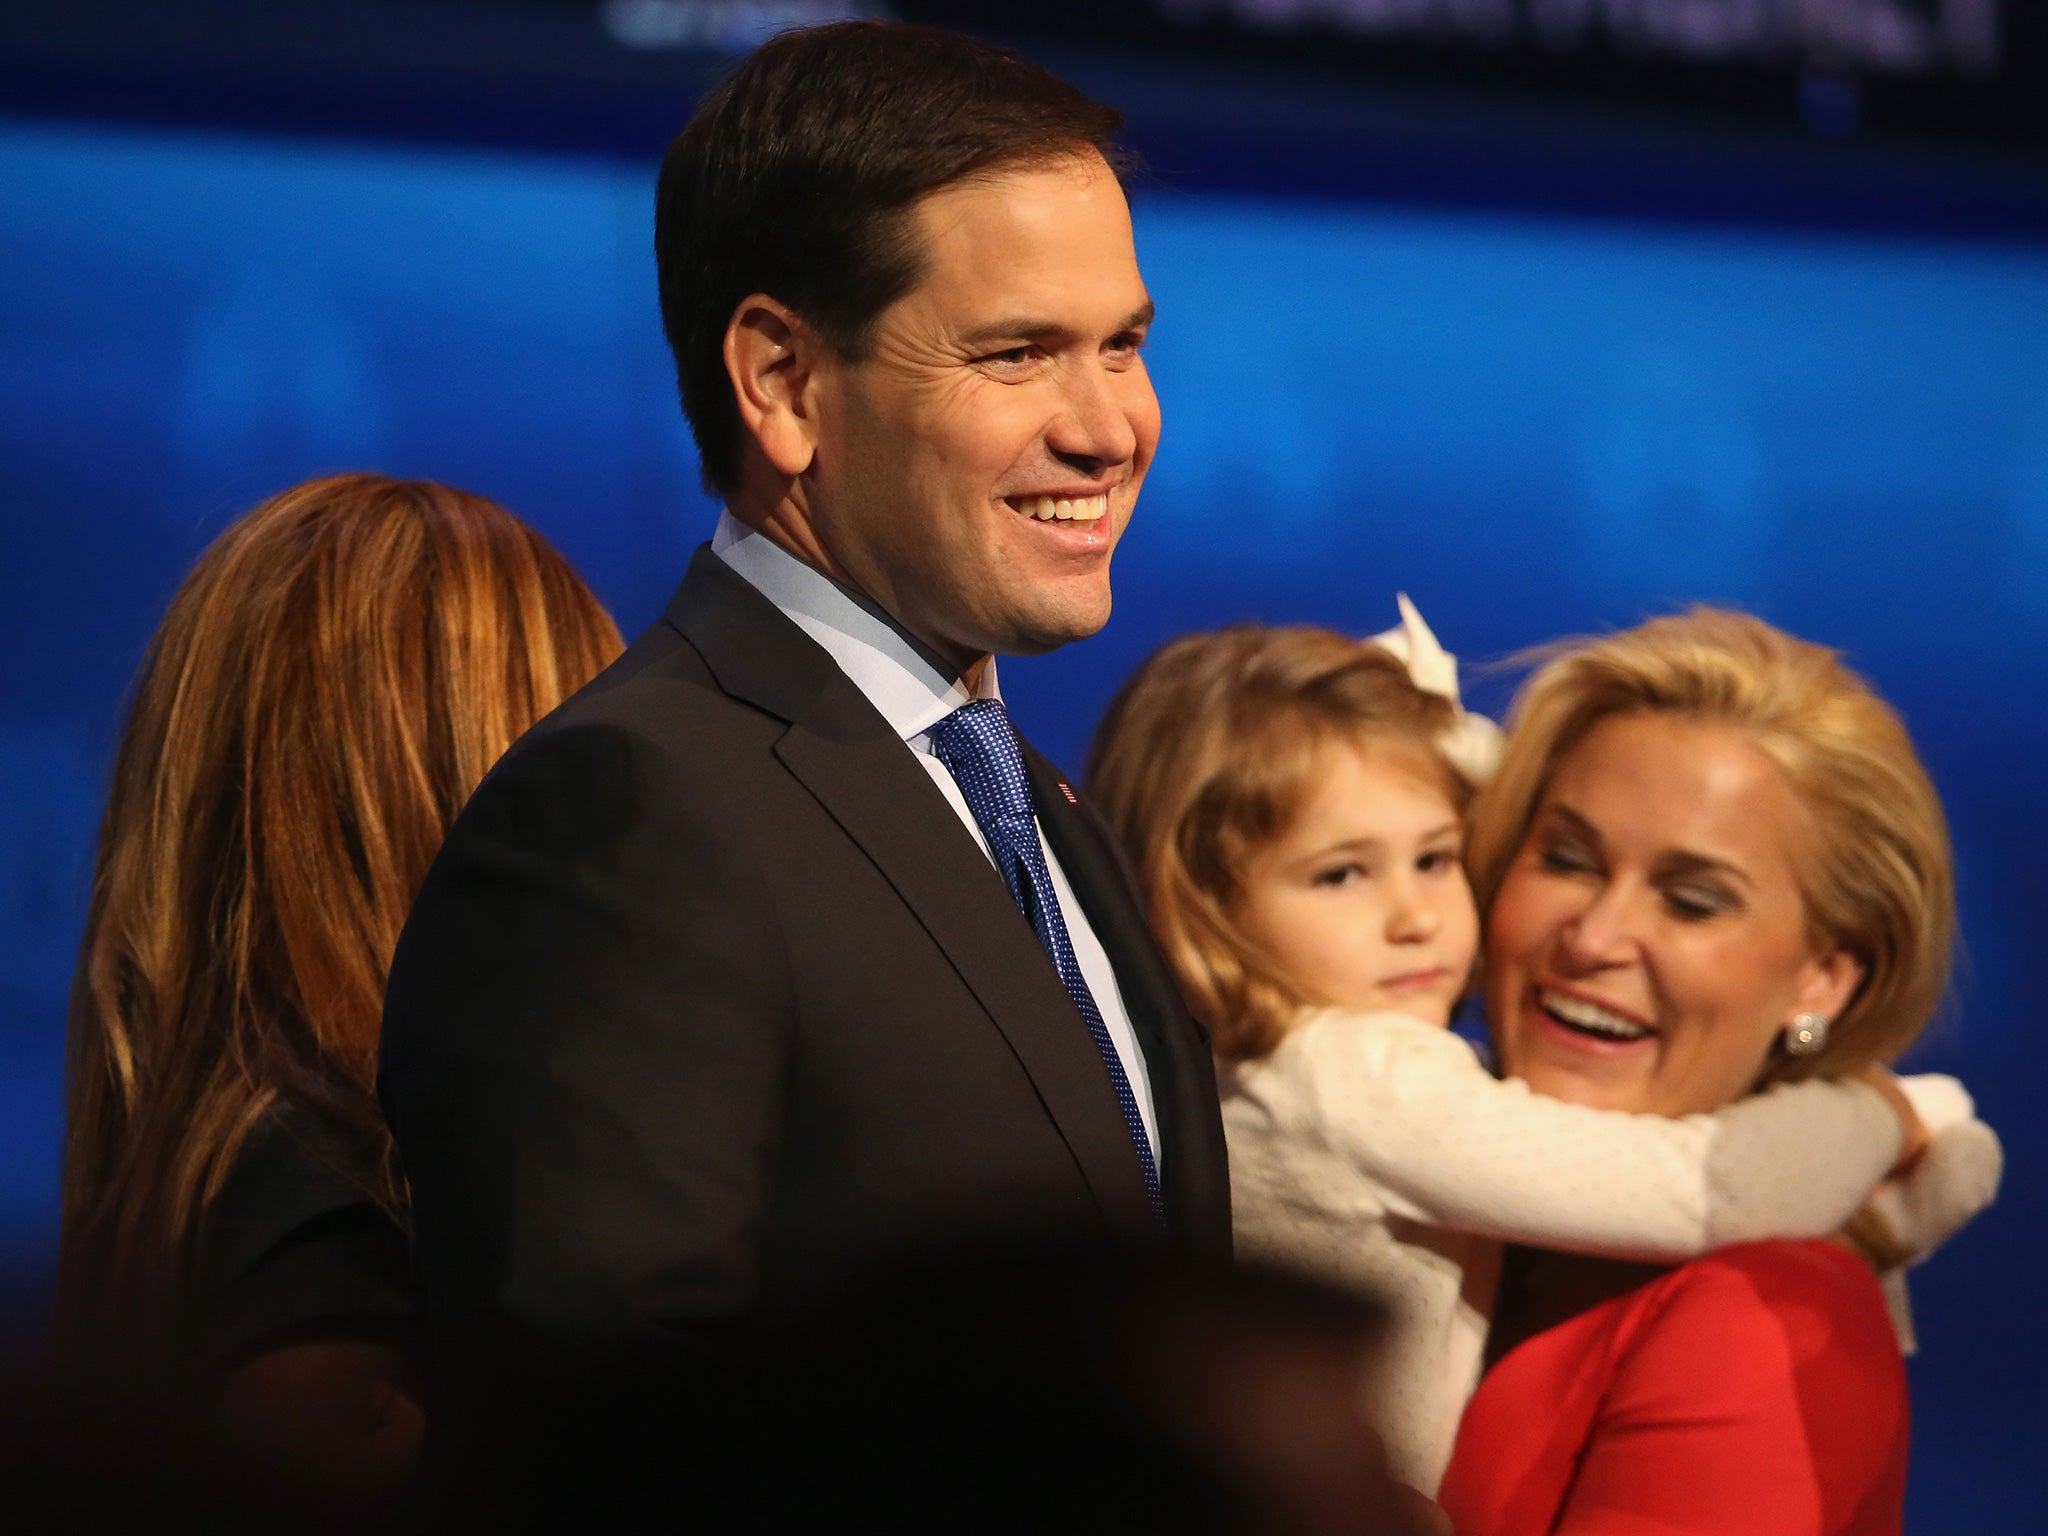 Marco Rubio is seen by many as being the most electable Republican candidate